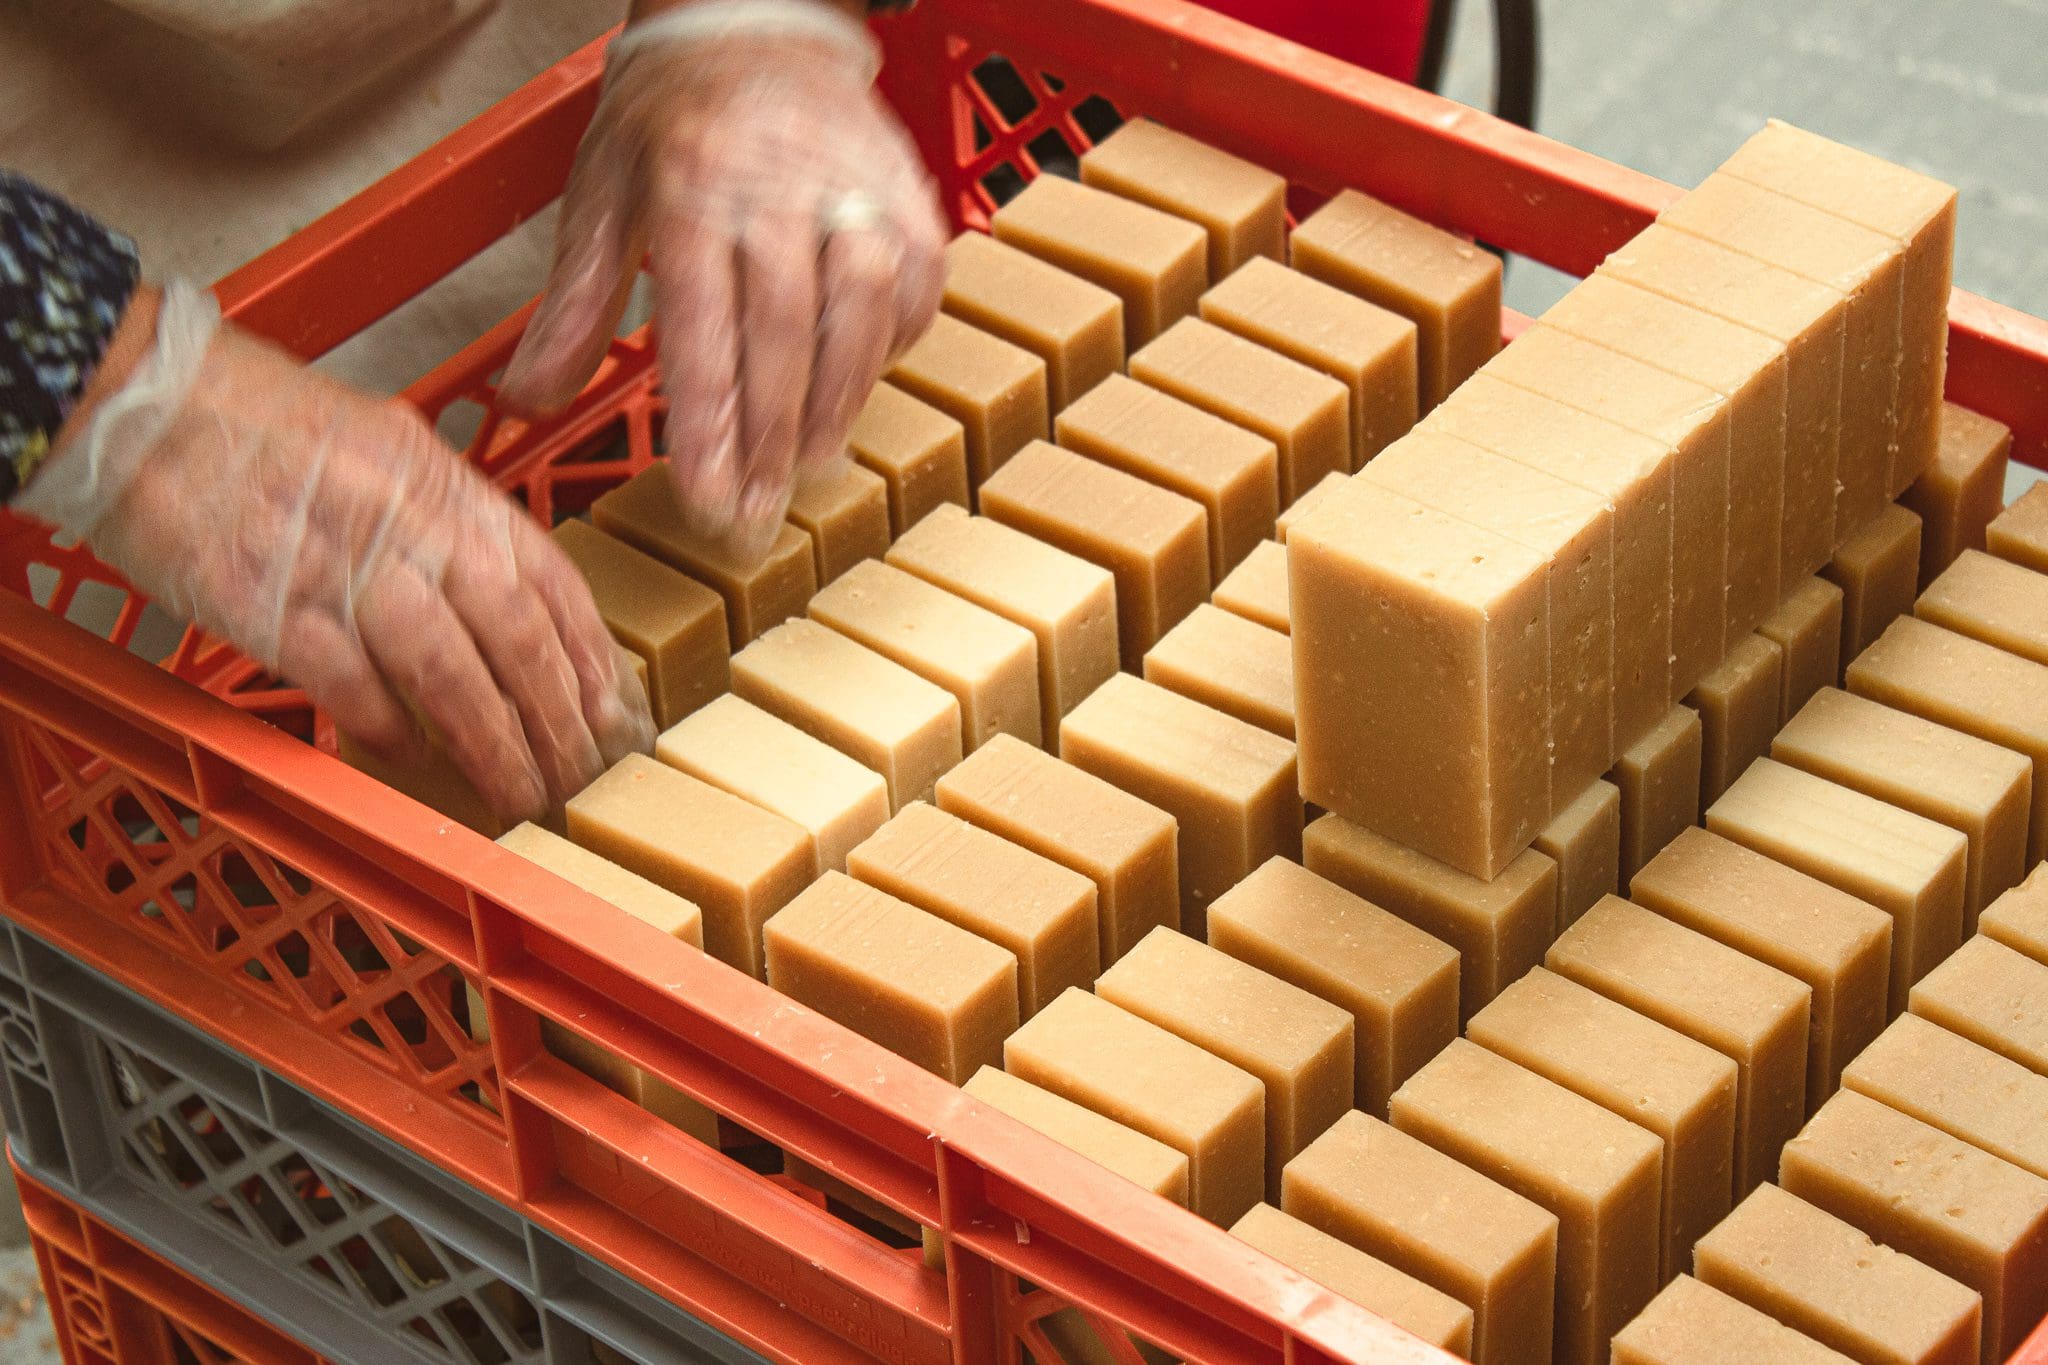 tlgsc soap bars prior to being packed in a red crate